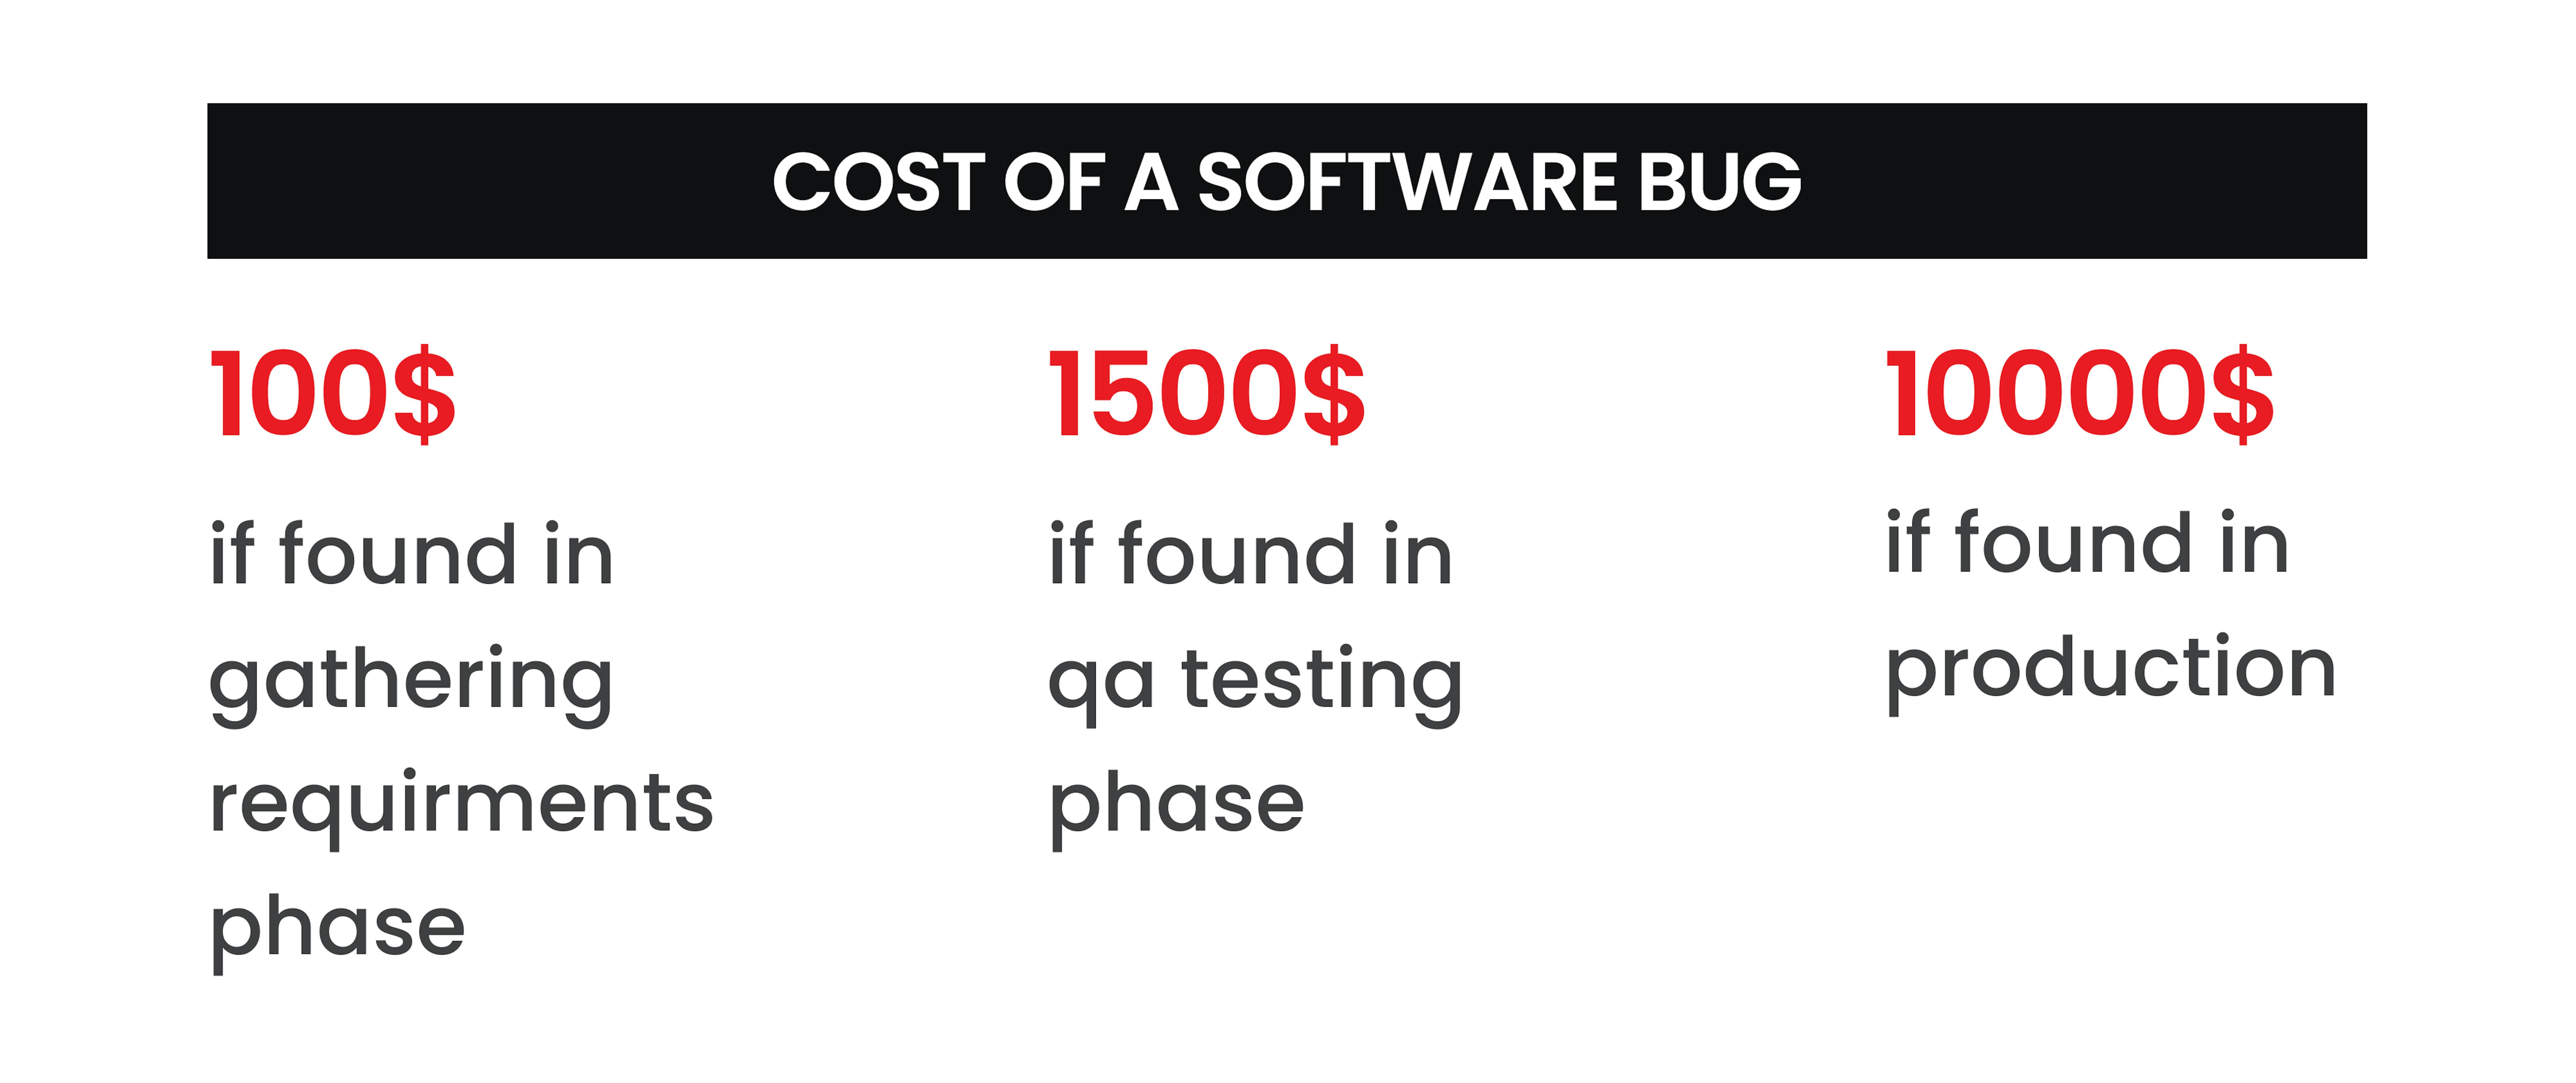 Cost of Software Bugs in Different Development Phases.